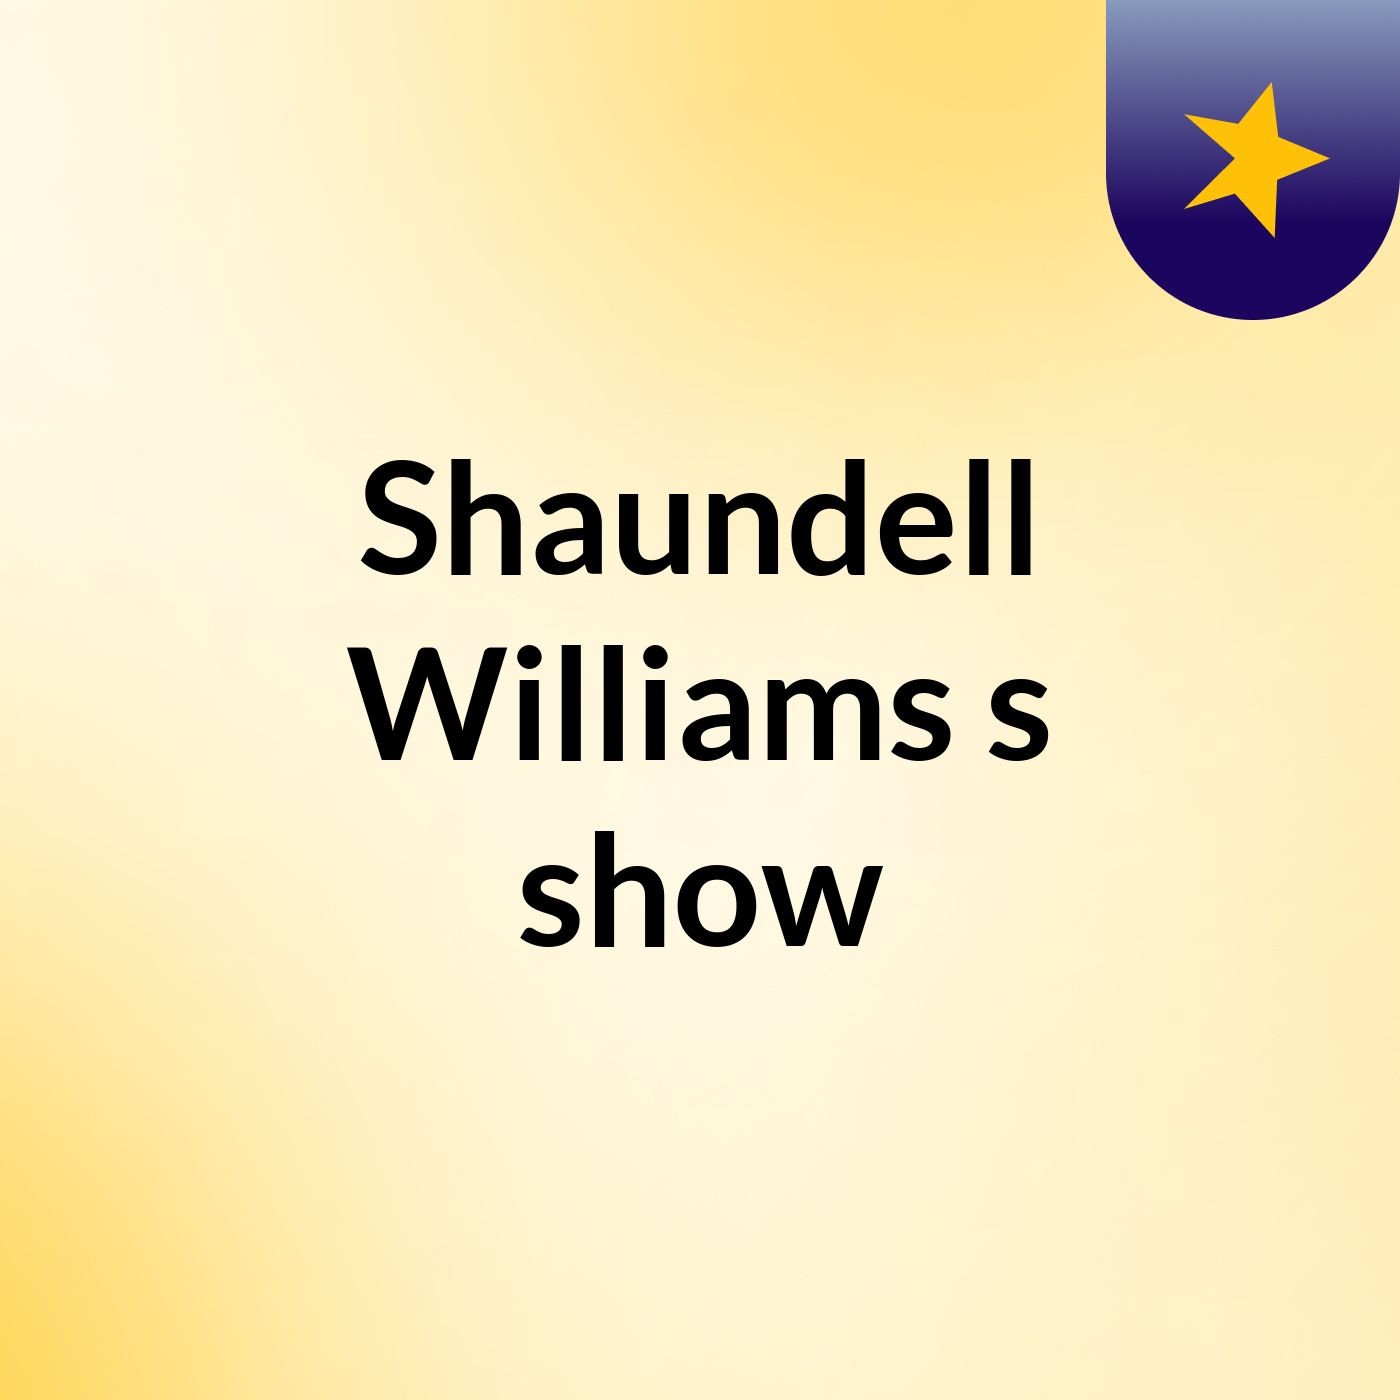 Shaundell Williams's show